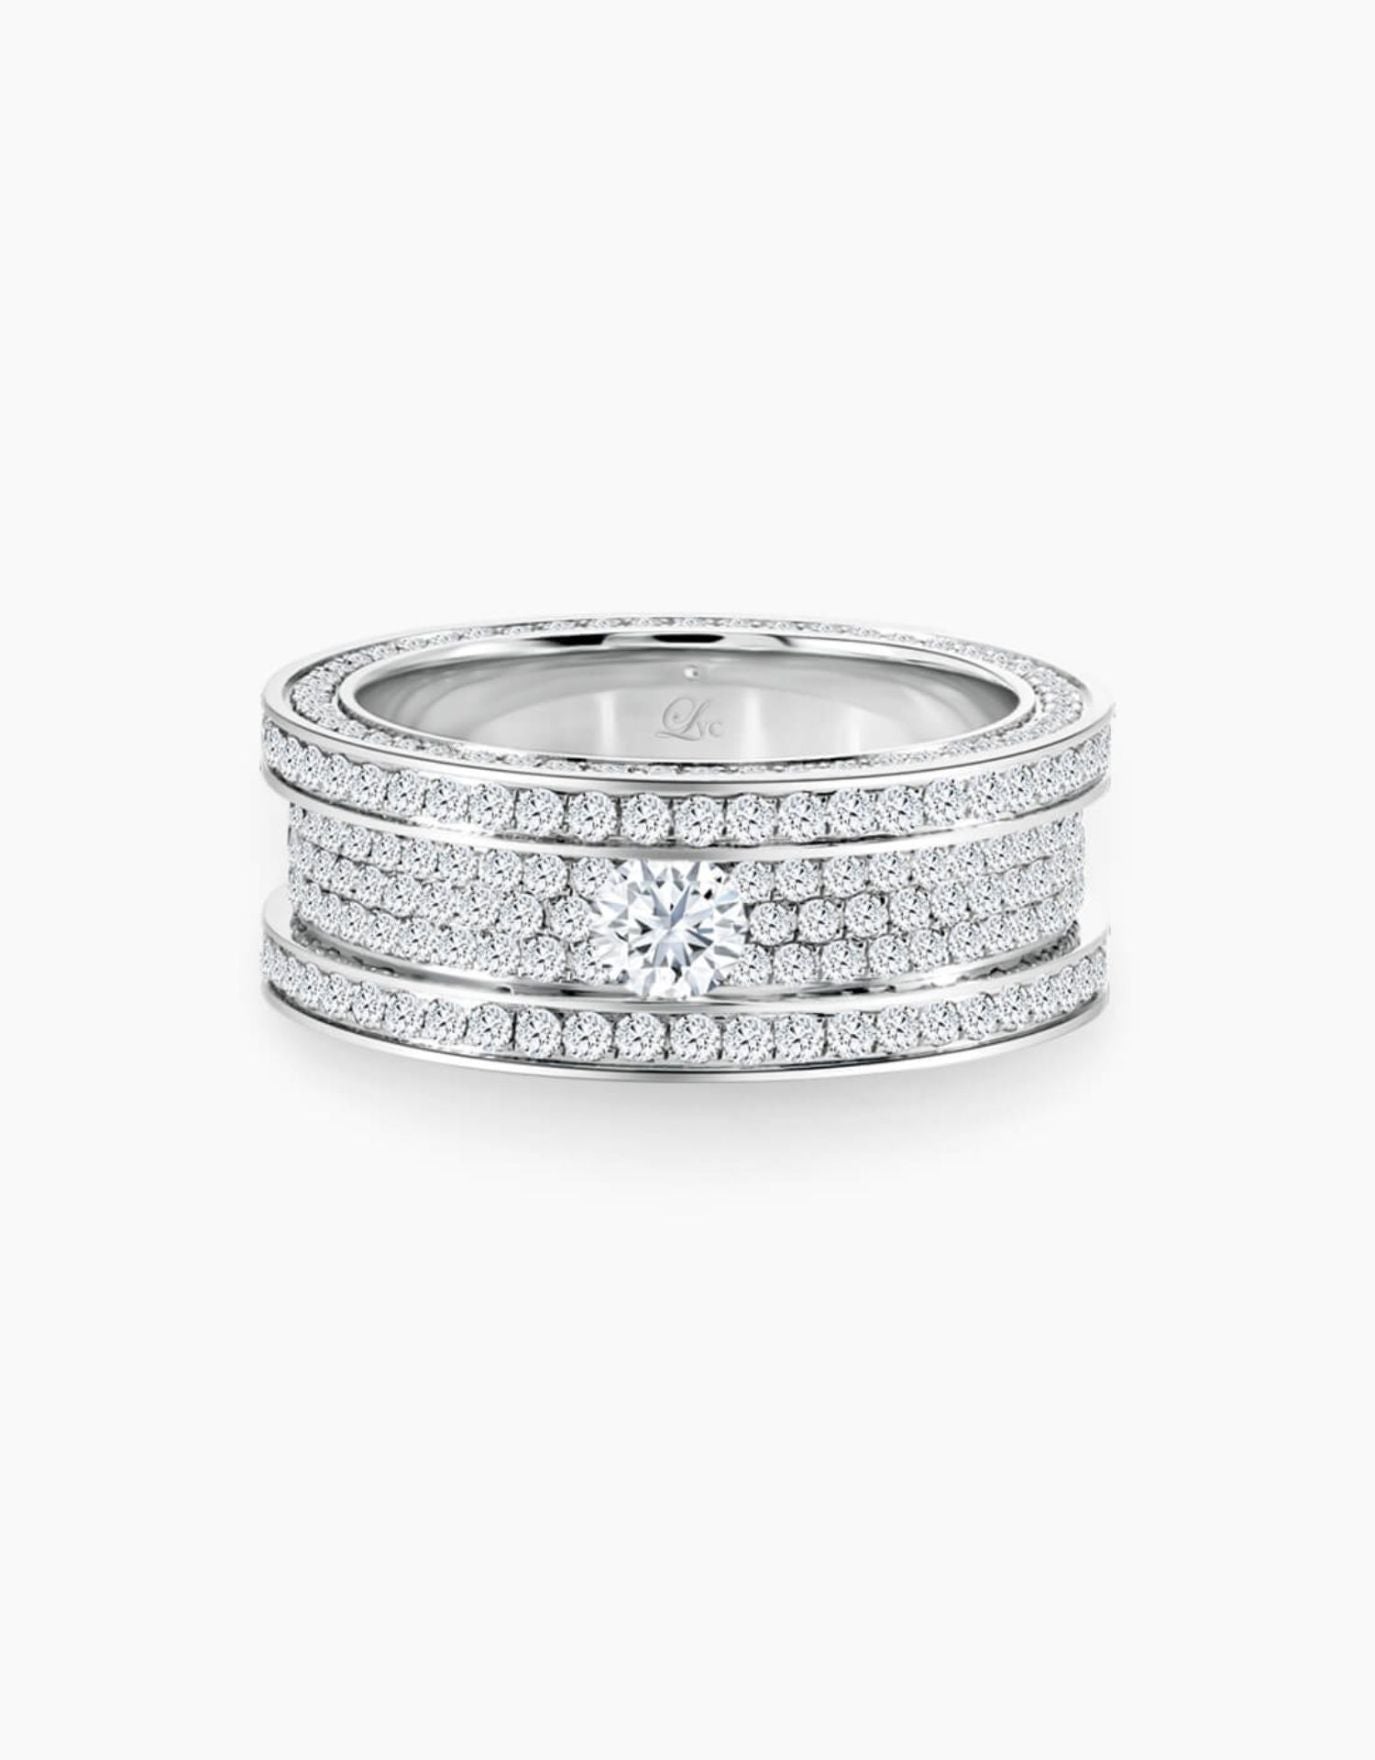 LVC Promise Anniversary Wedding Band Full Encrusted with Round Brilliant Diamonds